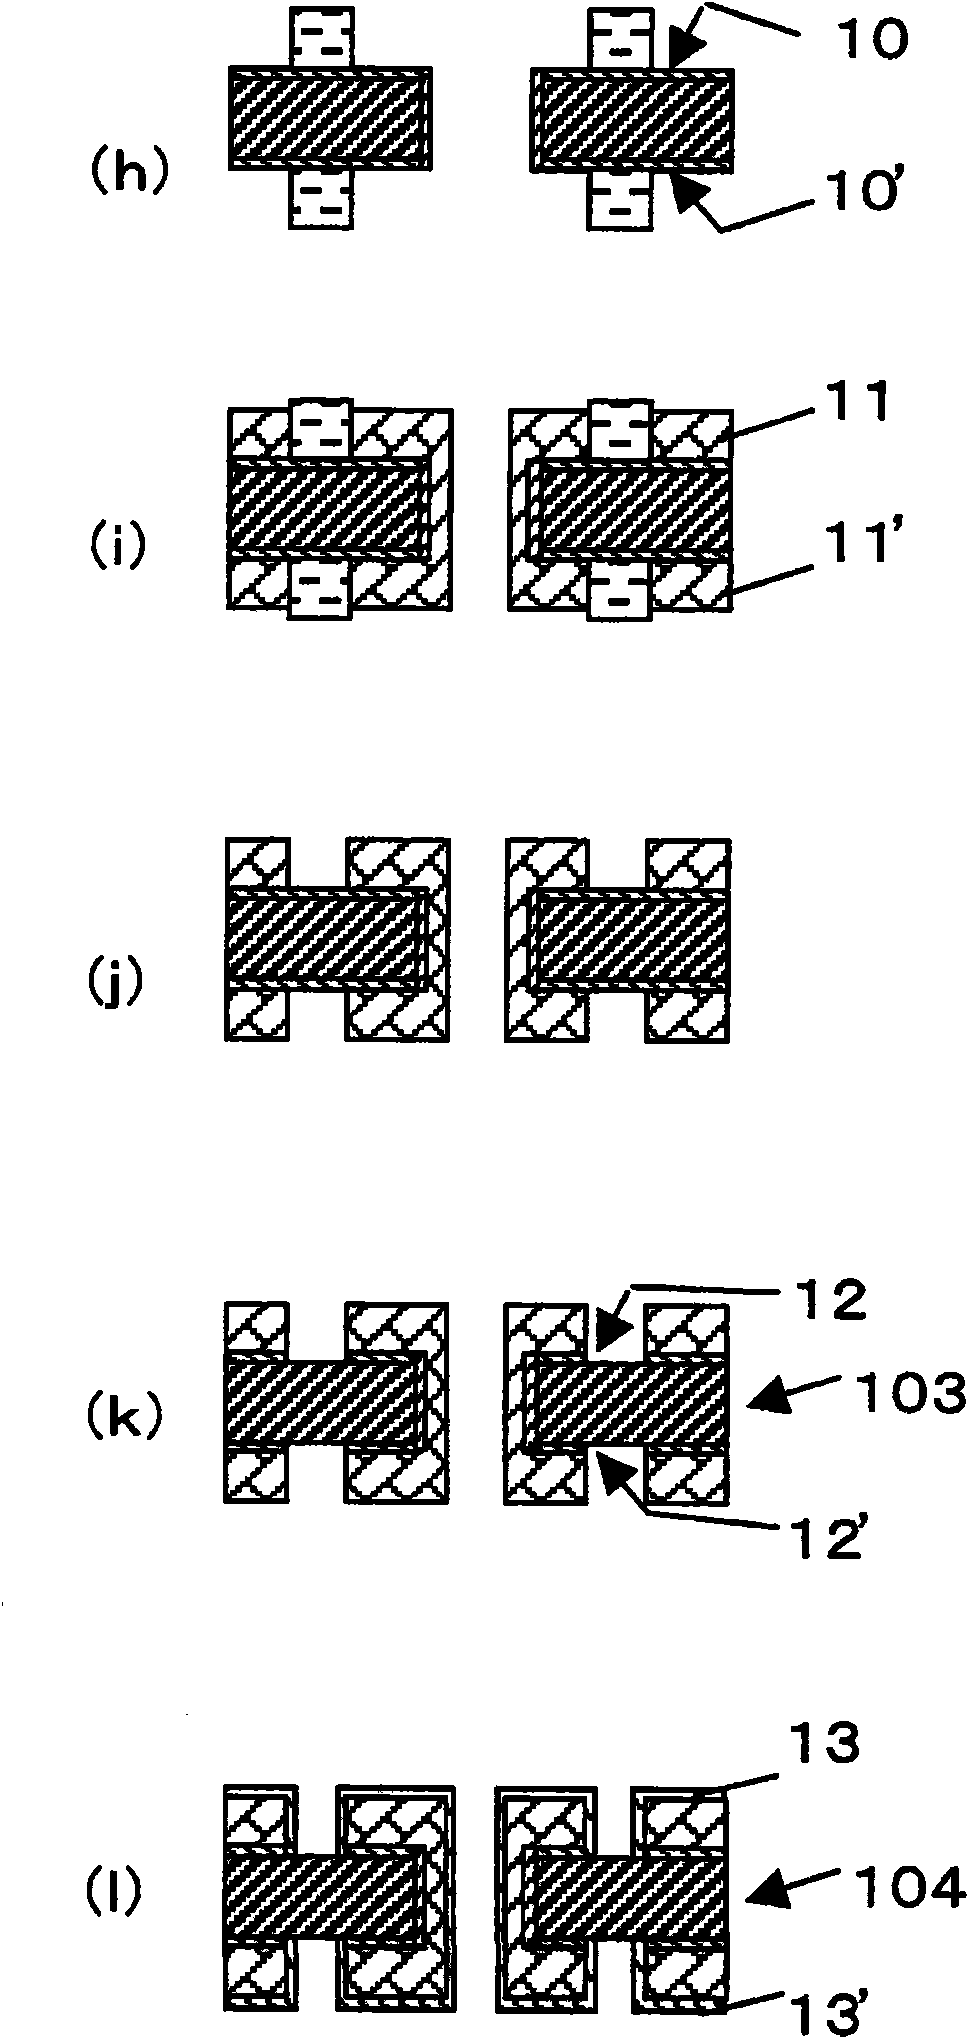 Method for manufacturing printed wiring board